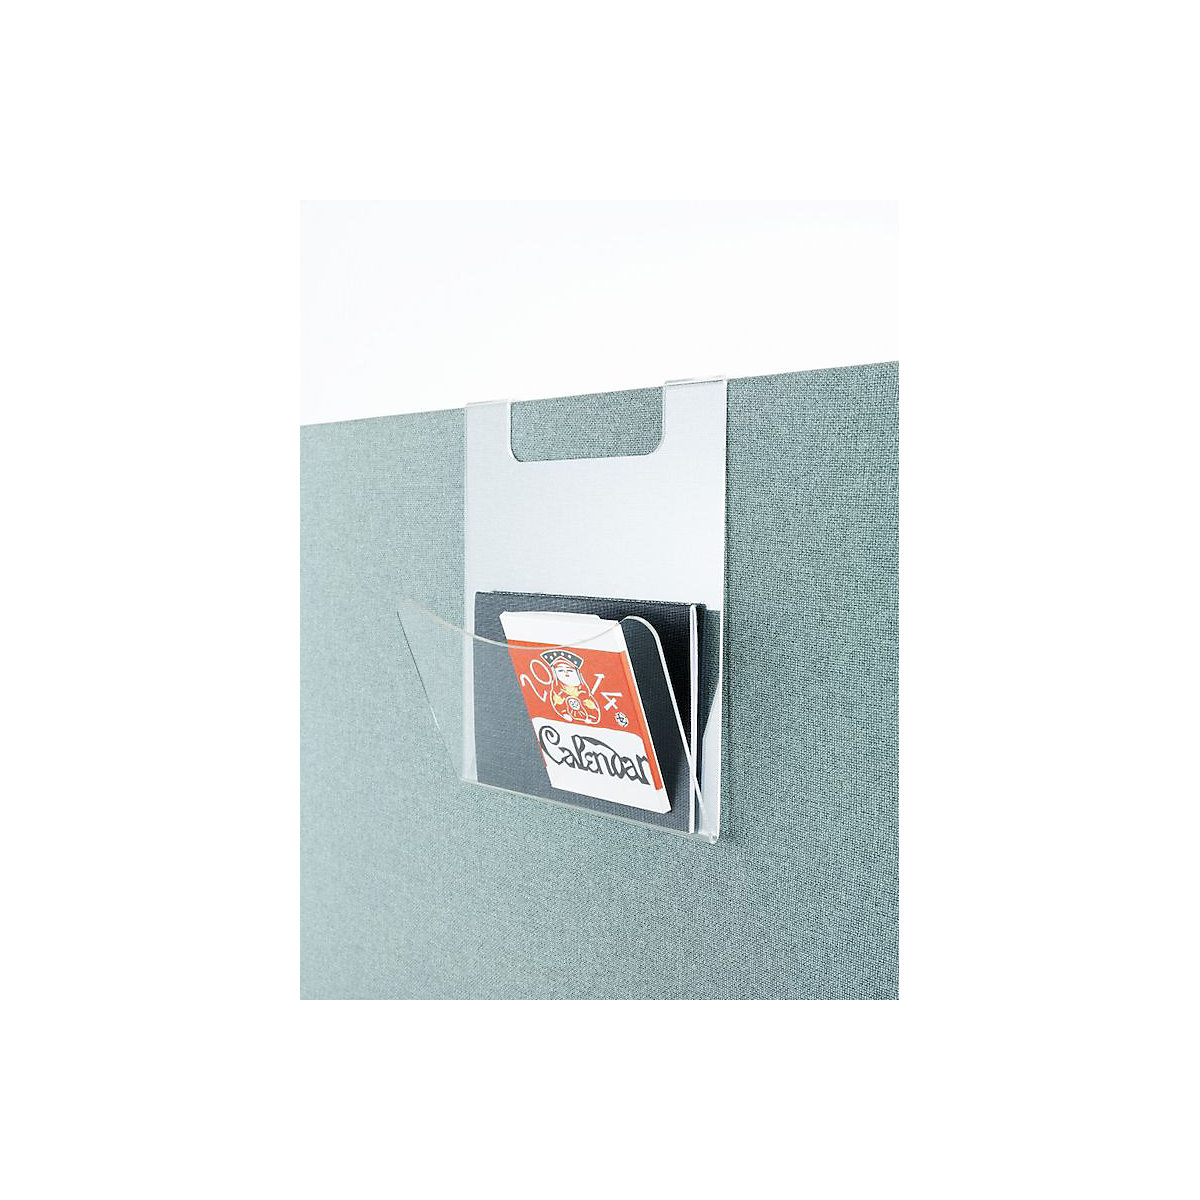 Document holder for acoustic partition